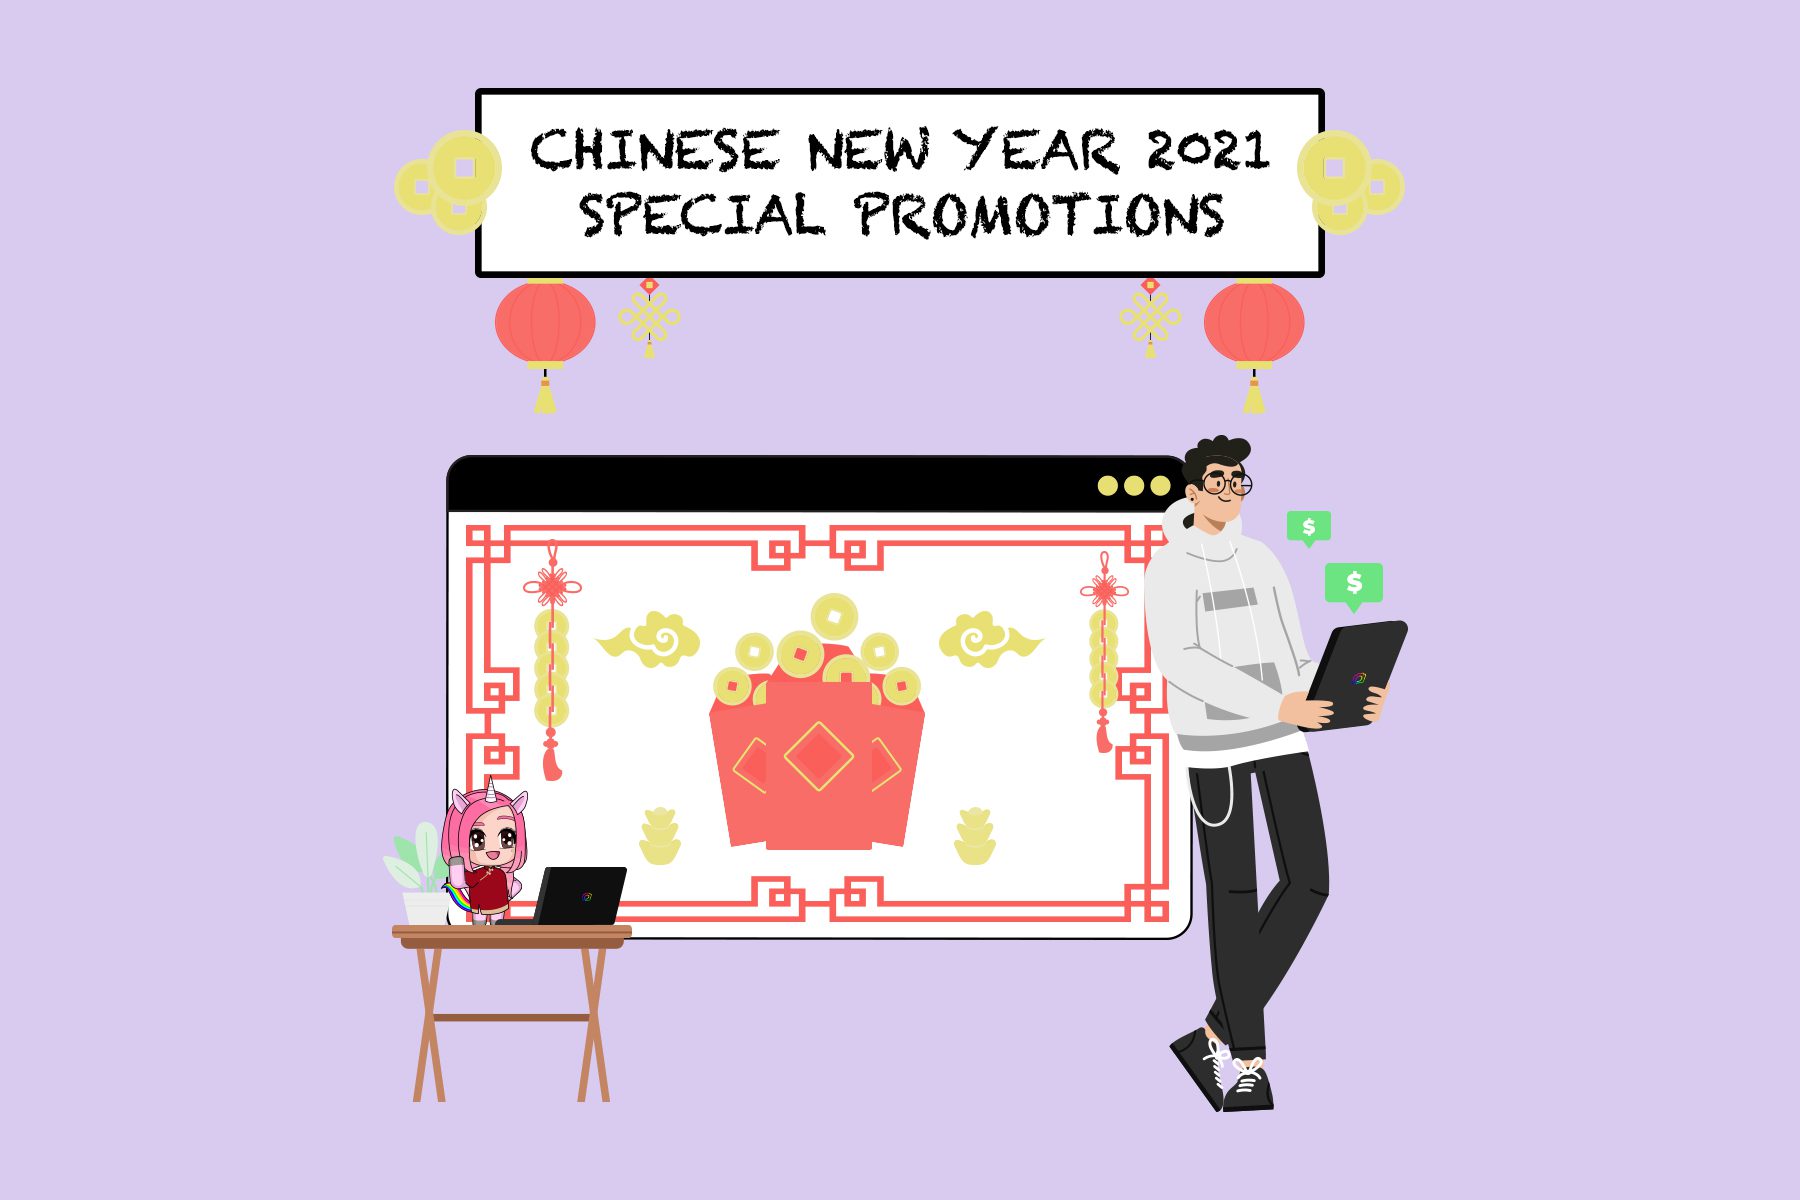 Chinese New Year 2021 special promotions